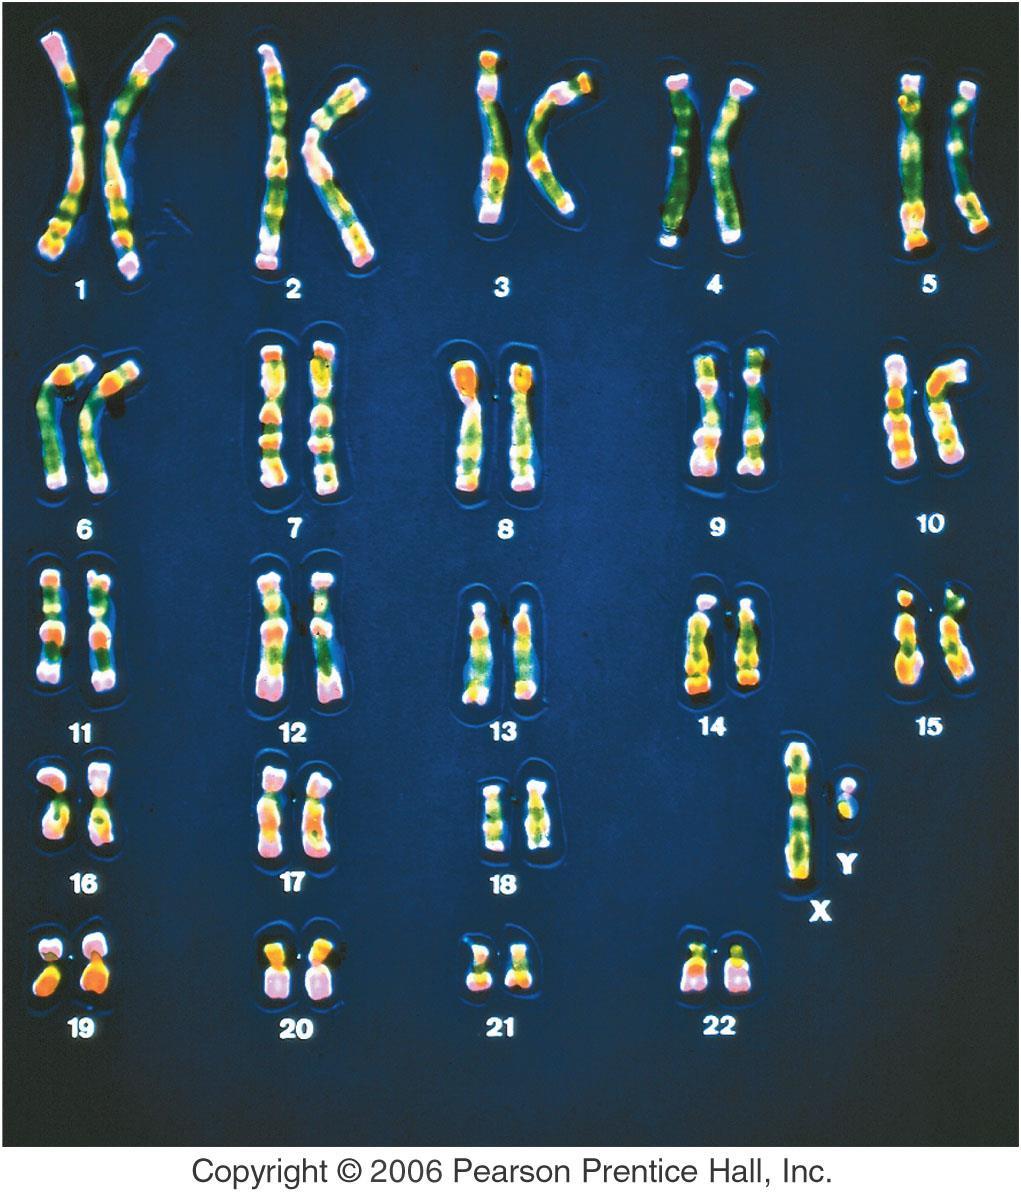 Chromosomes Karyotype number and type of chromosomes Diploid Cells two matched sets of chromosomes Homologous Chromosomes matched pair of chromosomes Sex